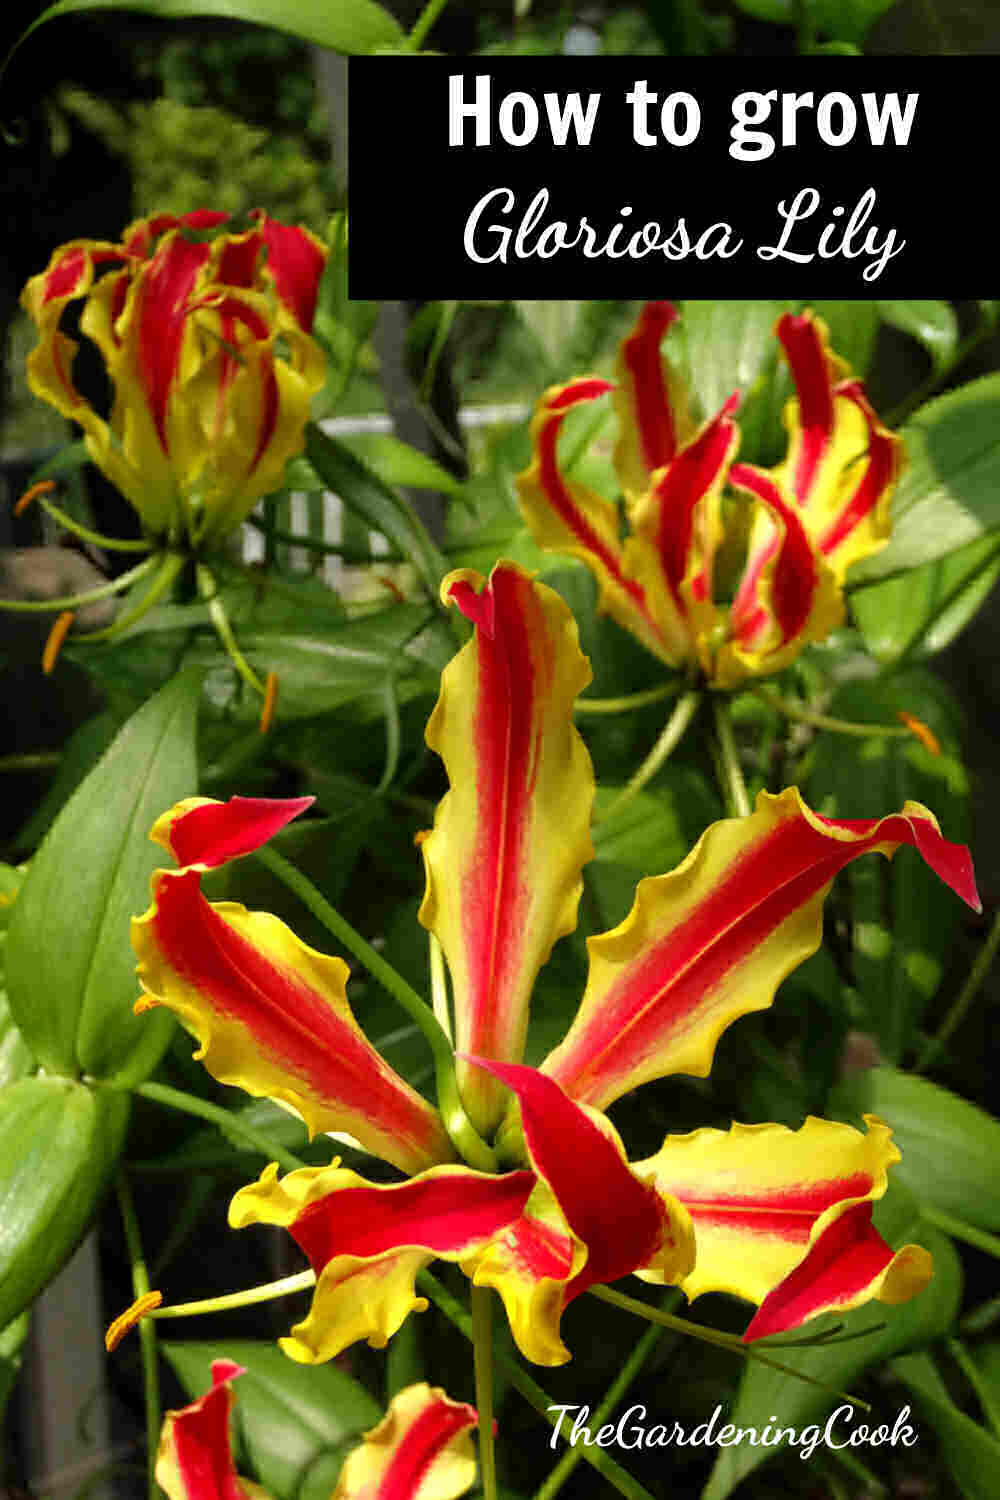 Three claw shaped red and yellow flowers with words How to grow gloriosa lily.